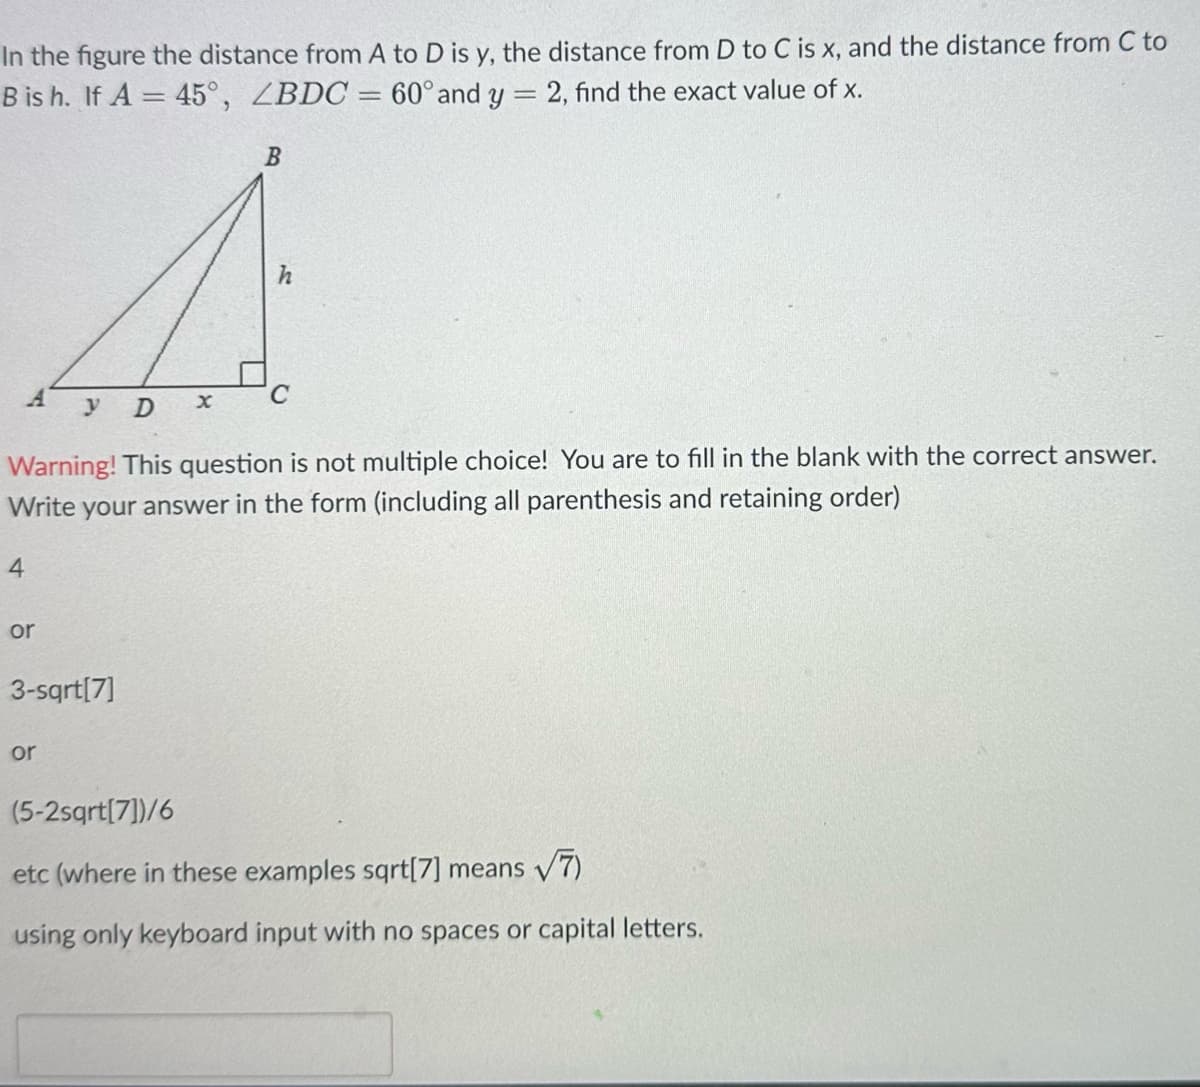 In the figure the distance from A to D is y, the distance from D to C is x, and the distance from C to
B is h. If A = 45°, ZBDC = 60° and y = 2, find the exact value of x.
B
4
h
C
D
Warning! This question not multiple choice! You are to fill in the blank with the correct answer.
Write your answer in the form (including all parenthesis and retaining order)
4
or
3-sqrt[7]
or
(5-2sqrt[7])/6
etc (where in these examples sqrt[7] means √7)
using only keyboard input with no spaces or capital letters.